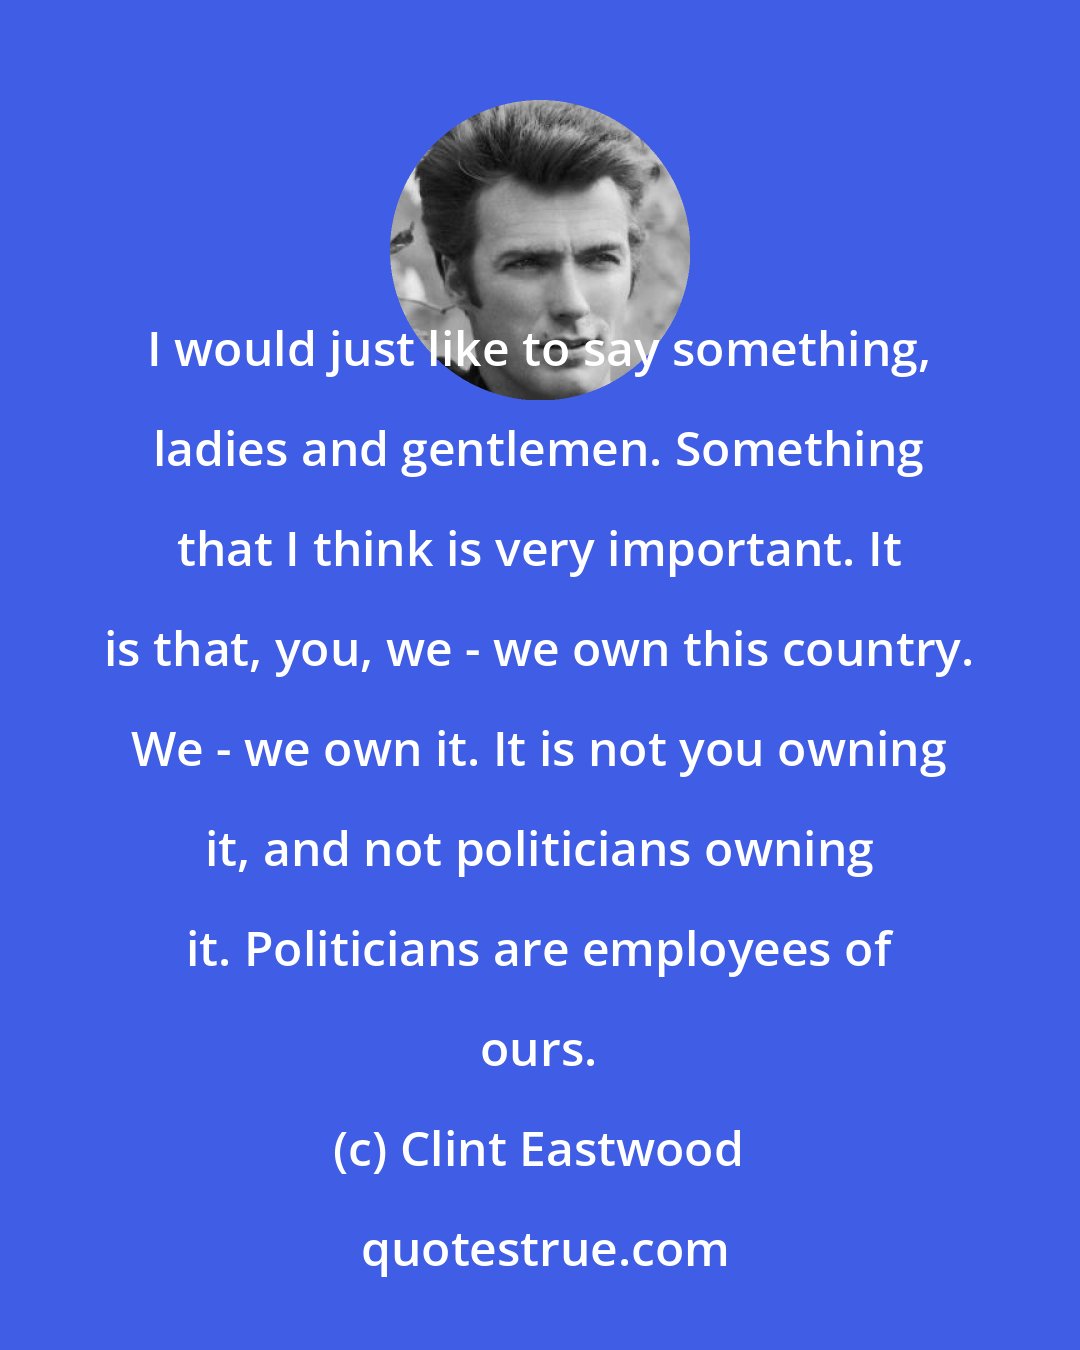 Clint Eastwood: I would just like to say something, ladies and gentlemen. Something that I think is very important. It is that, you, we - we own this country. We - we own it. It is not you owning it, and not politicians owning it. Politicians are employees of ours.